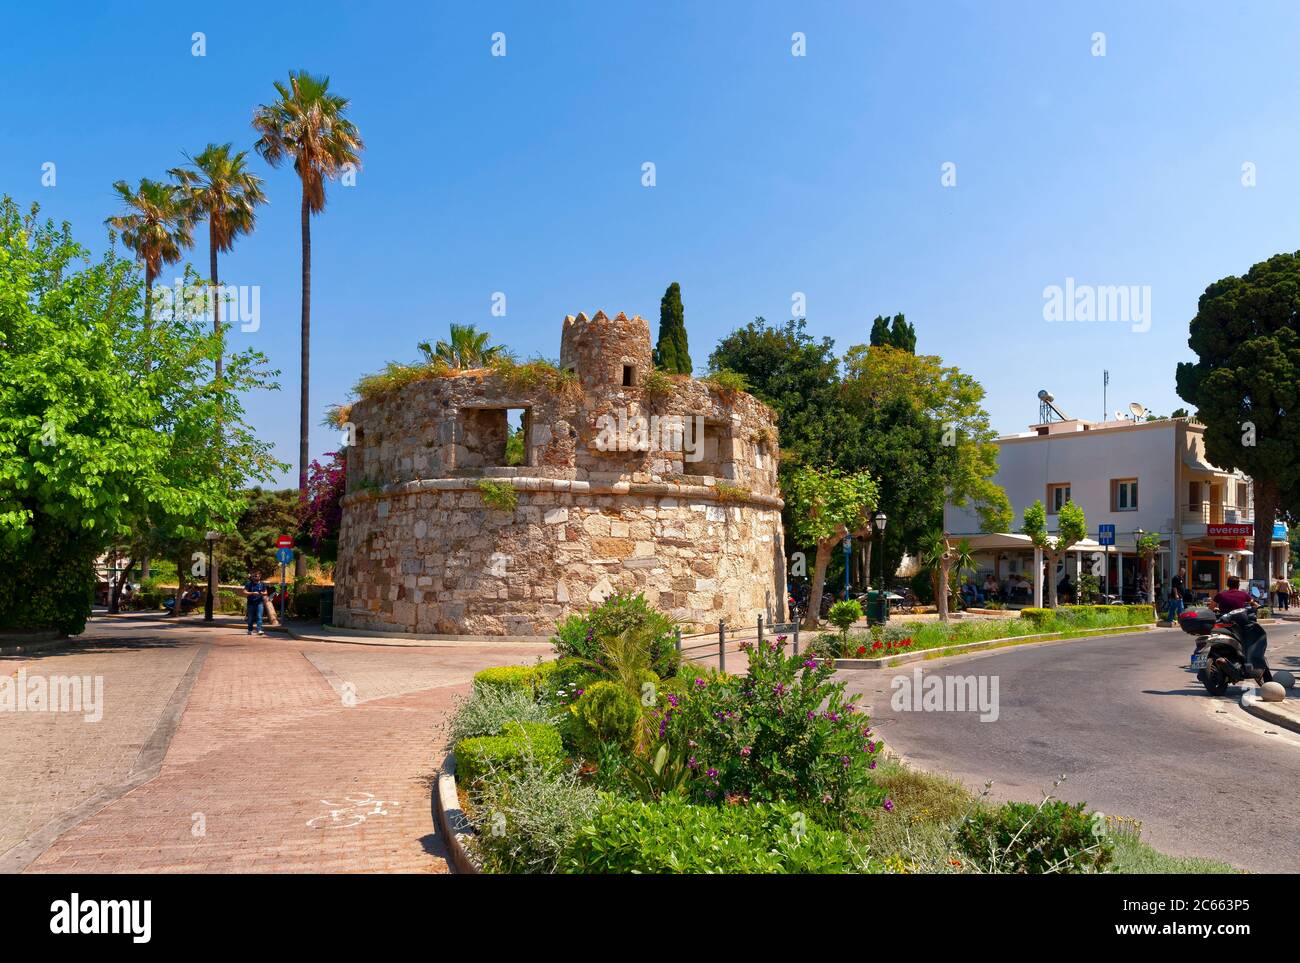 Medieval fortified tower, Kos Island, Greece, Europe Stock Photo